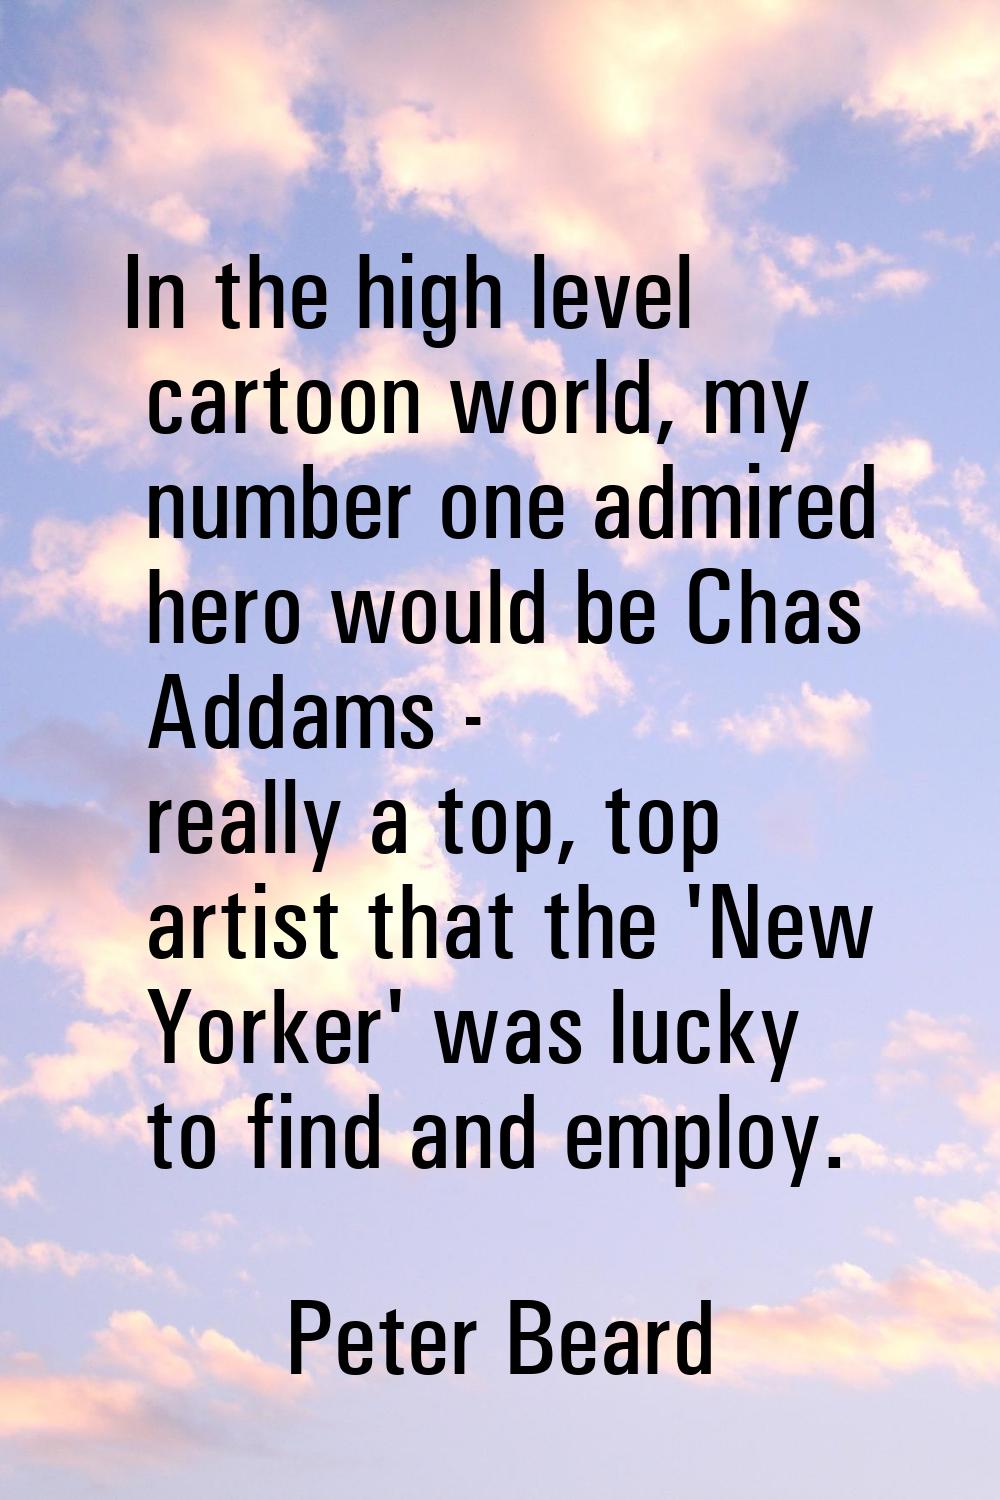 In the high level cartoon world, my number one admired hero would be Chas Addams - really a top, to